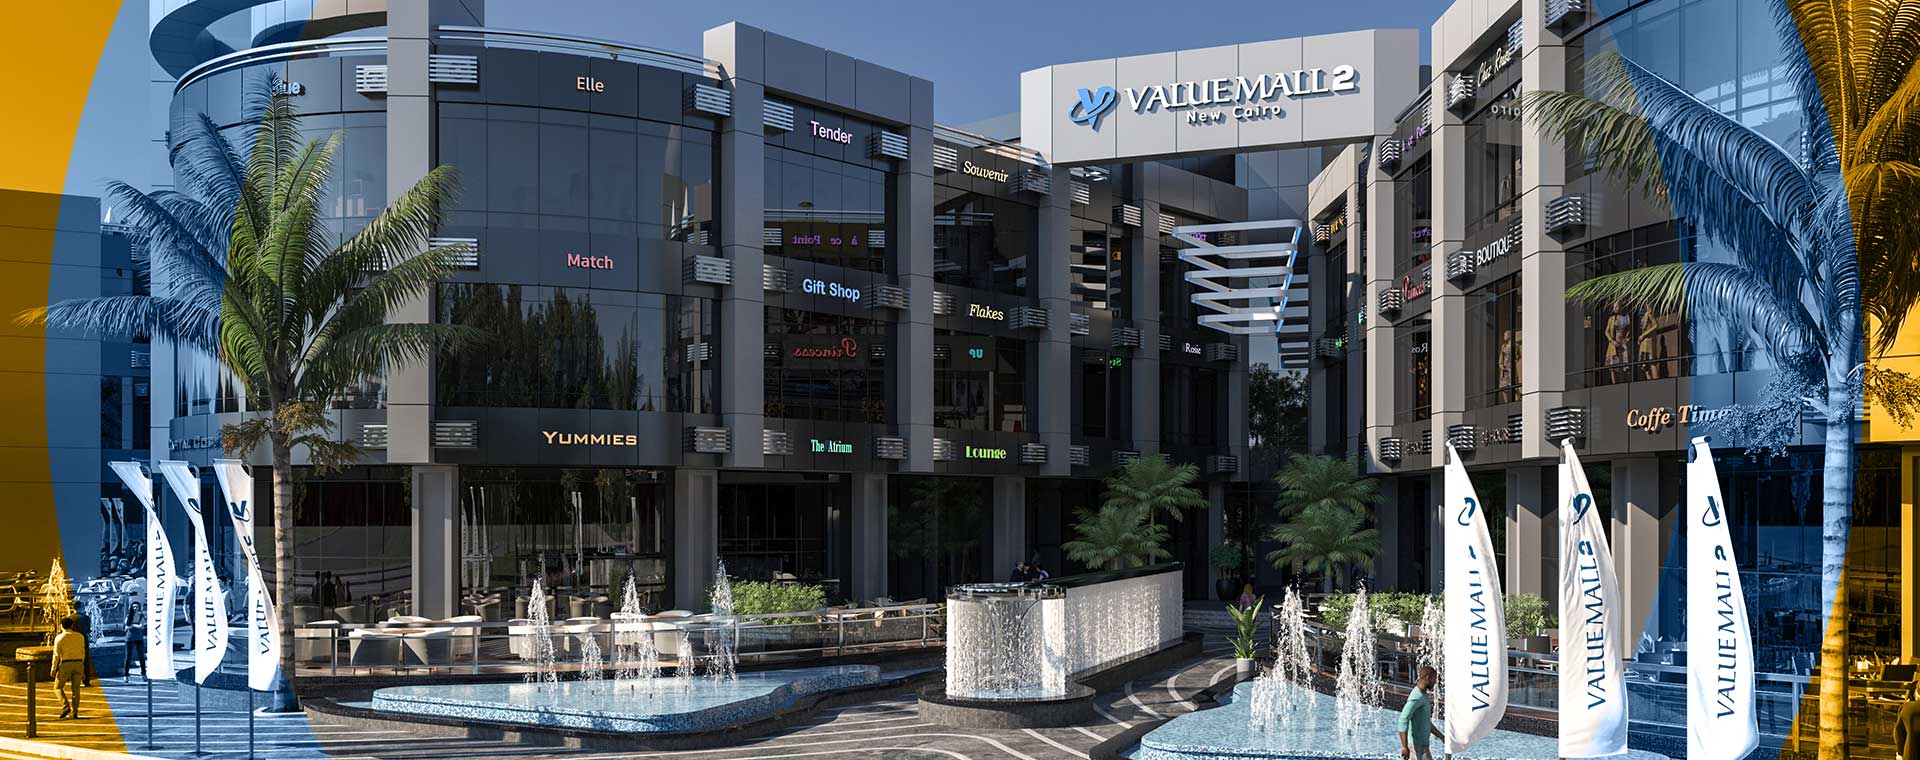 Details About Sale Of a Shop Starting From 55m²​​​​​​​ in Value Mall 2